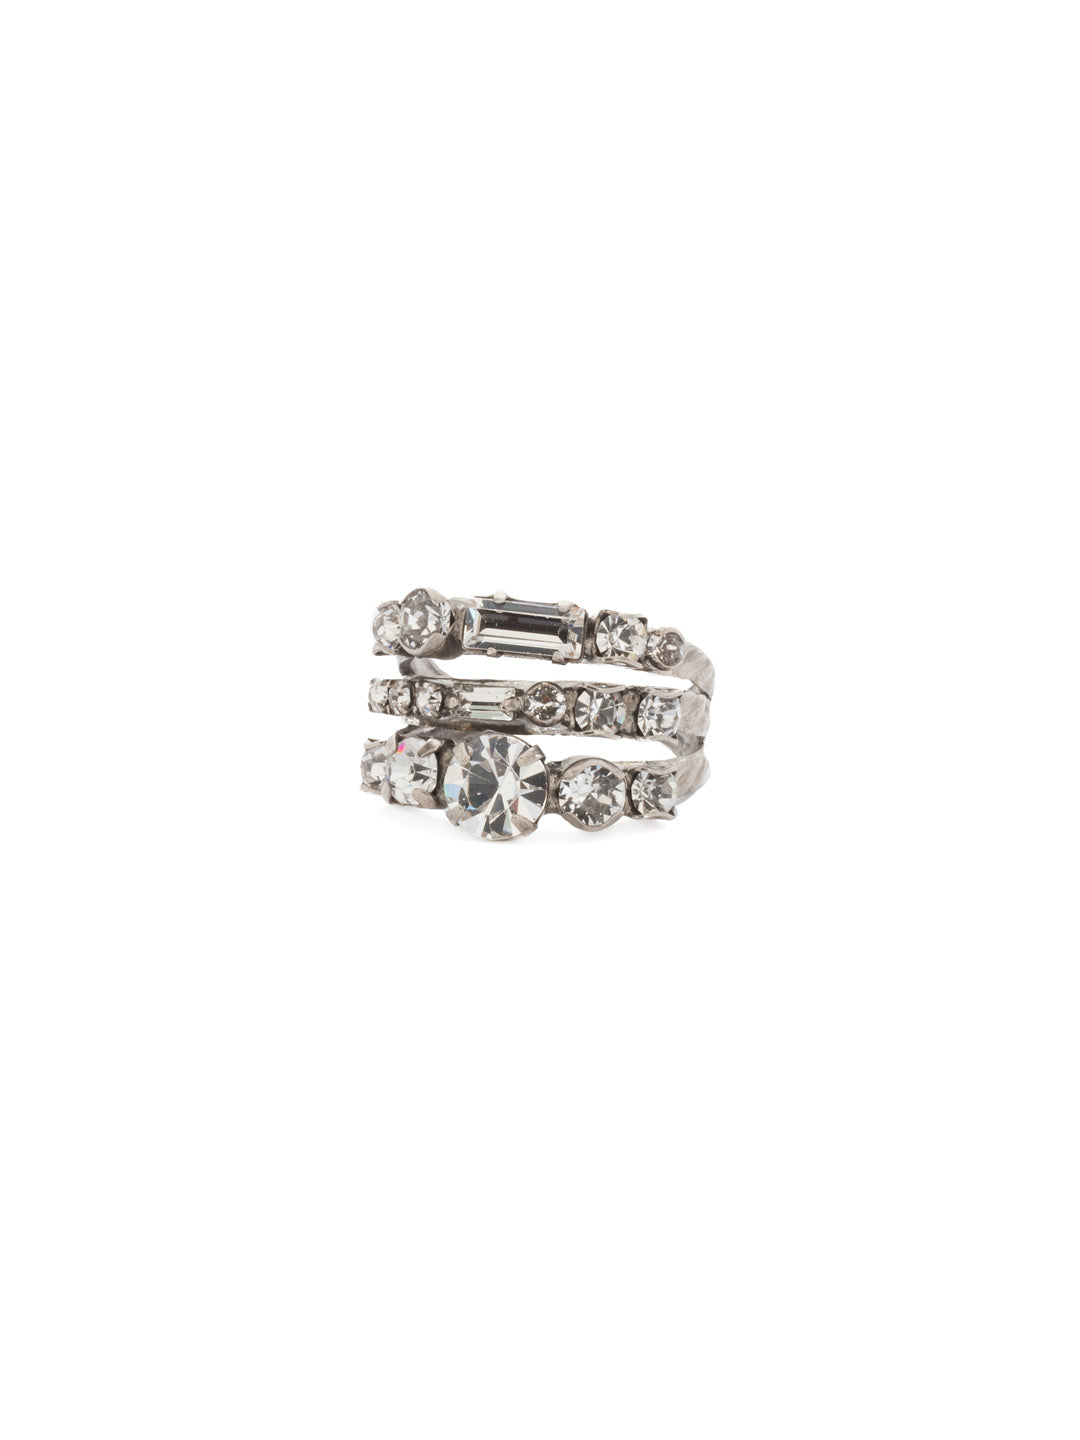 Triple Threat Stacked Ring - RDK23ASCRY